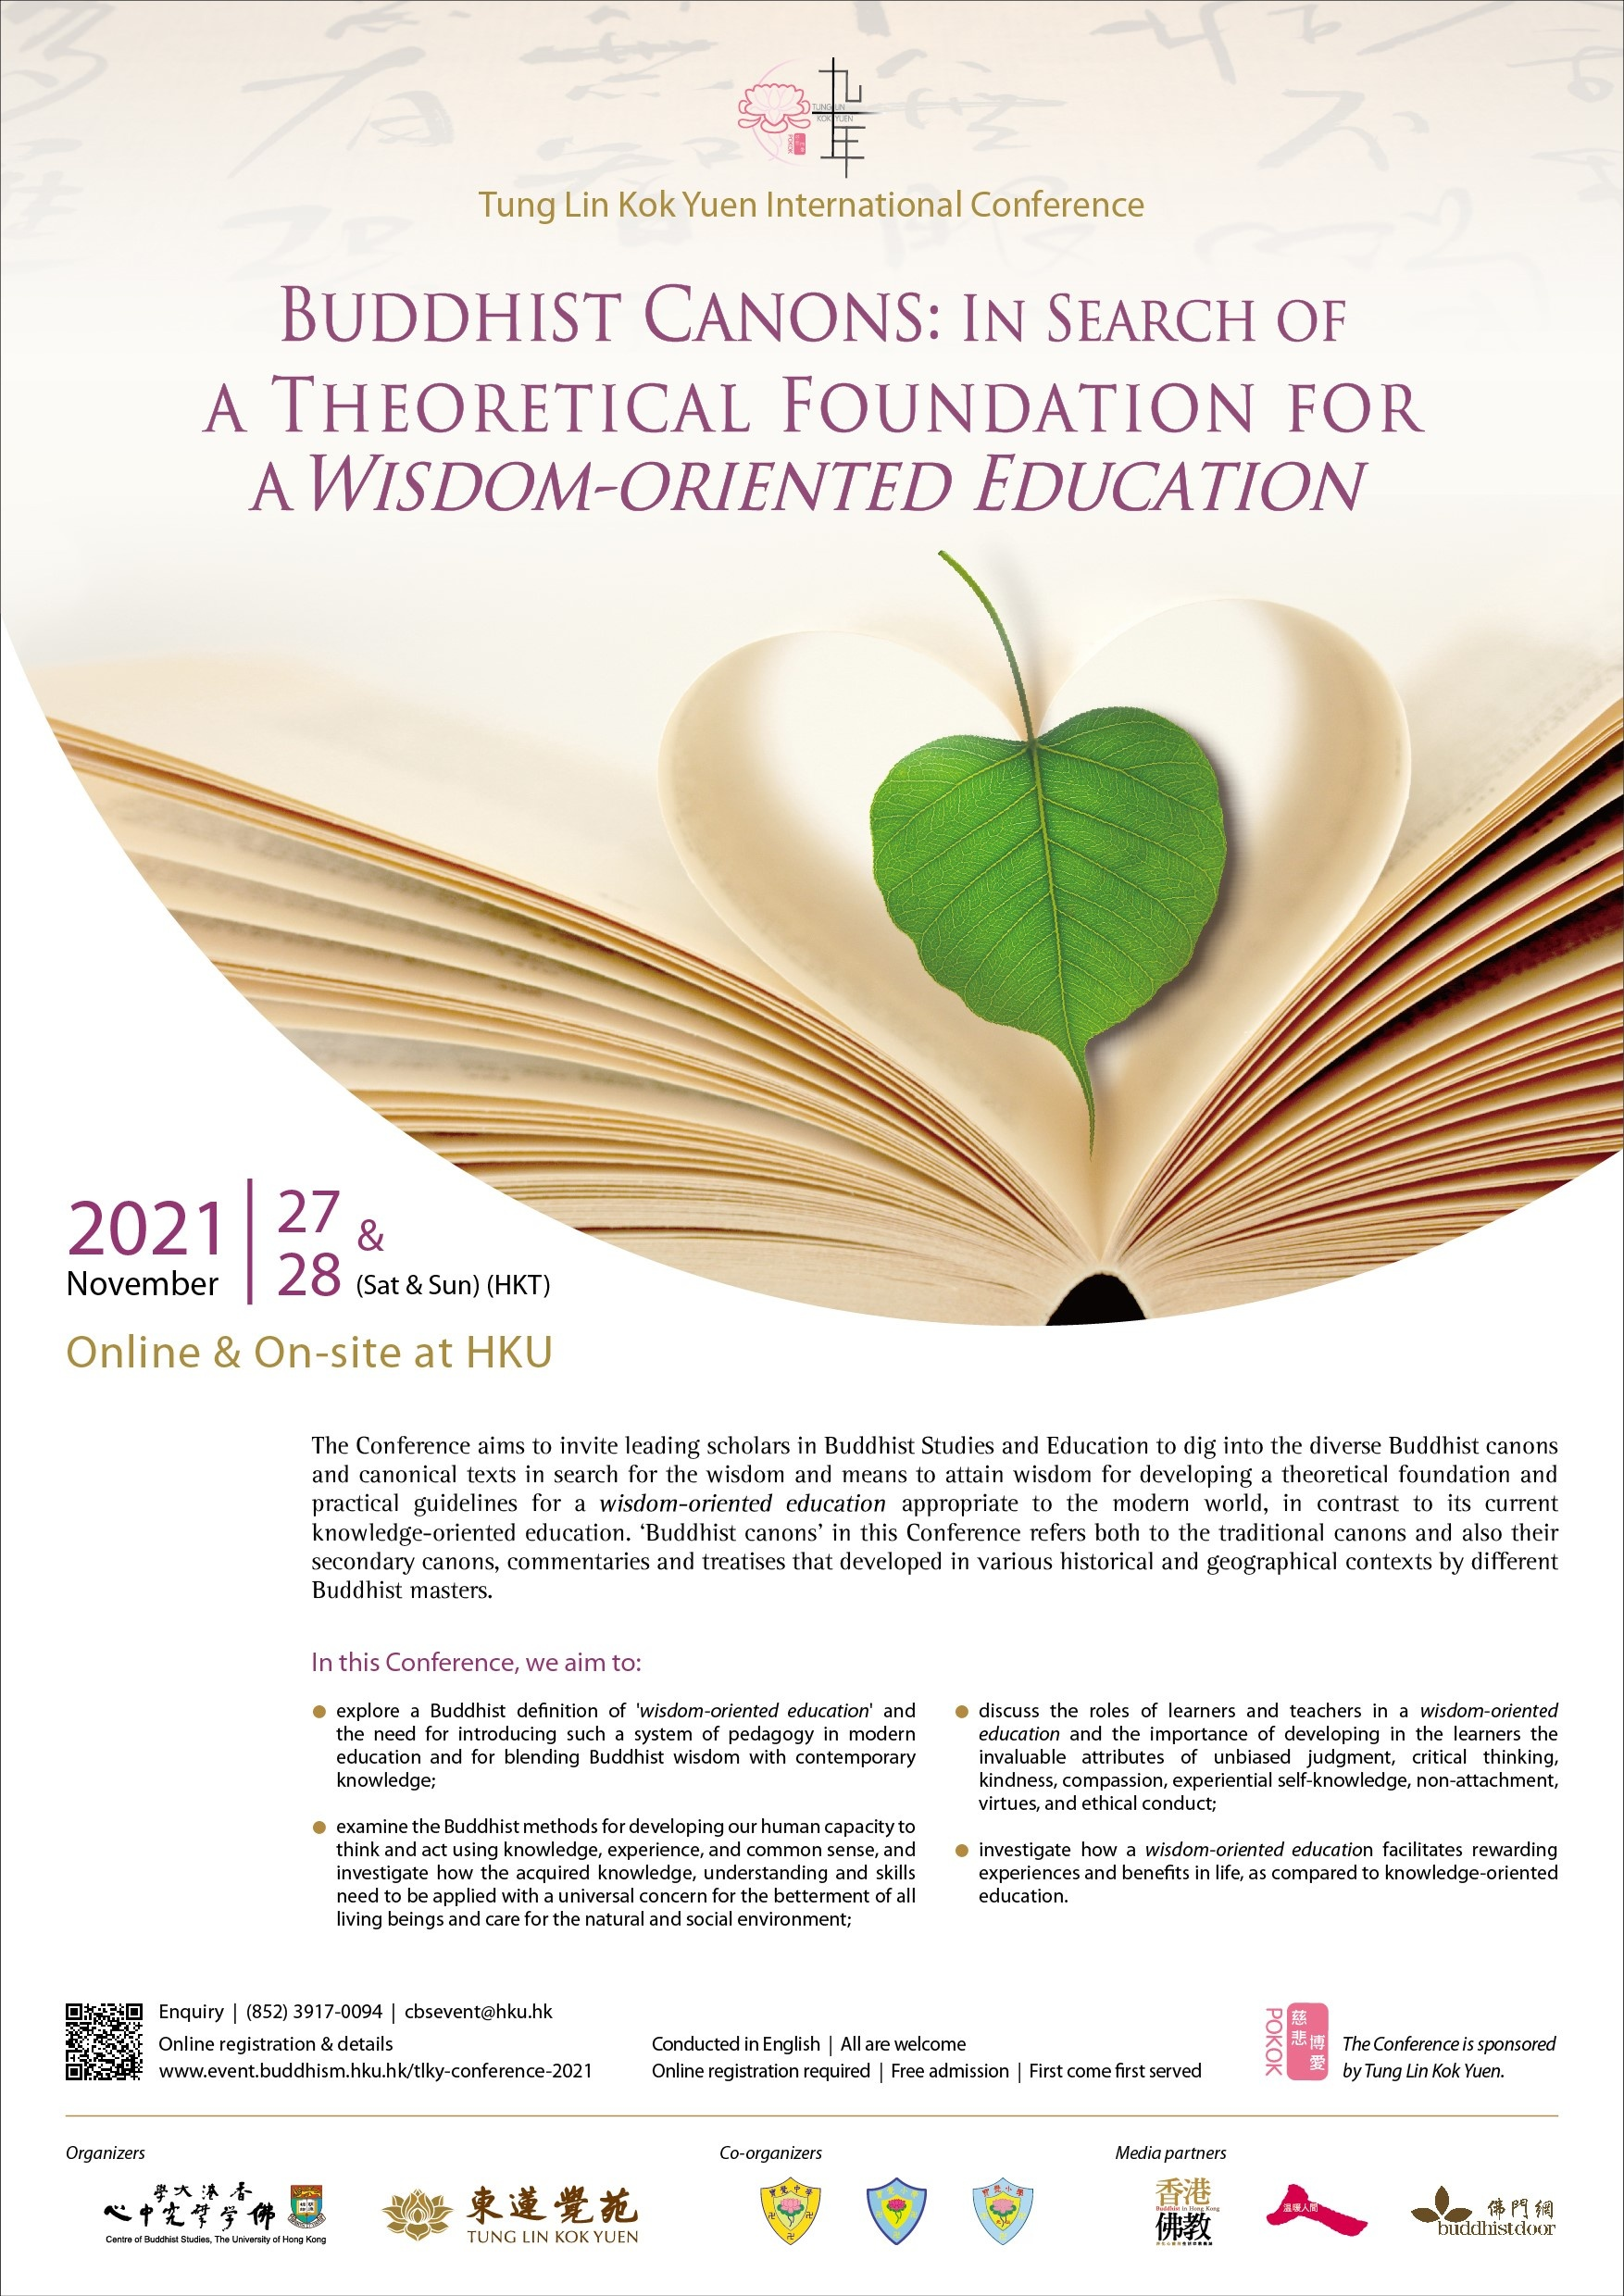 [Nov 27&28] TLKY International Conference "Buddhist Canons: In Search of a Theoretical Foundation for a Wisdom-oriented Education"